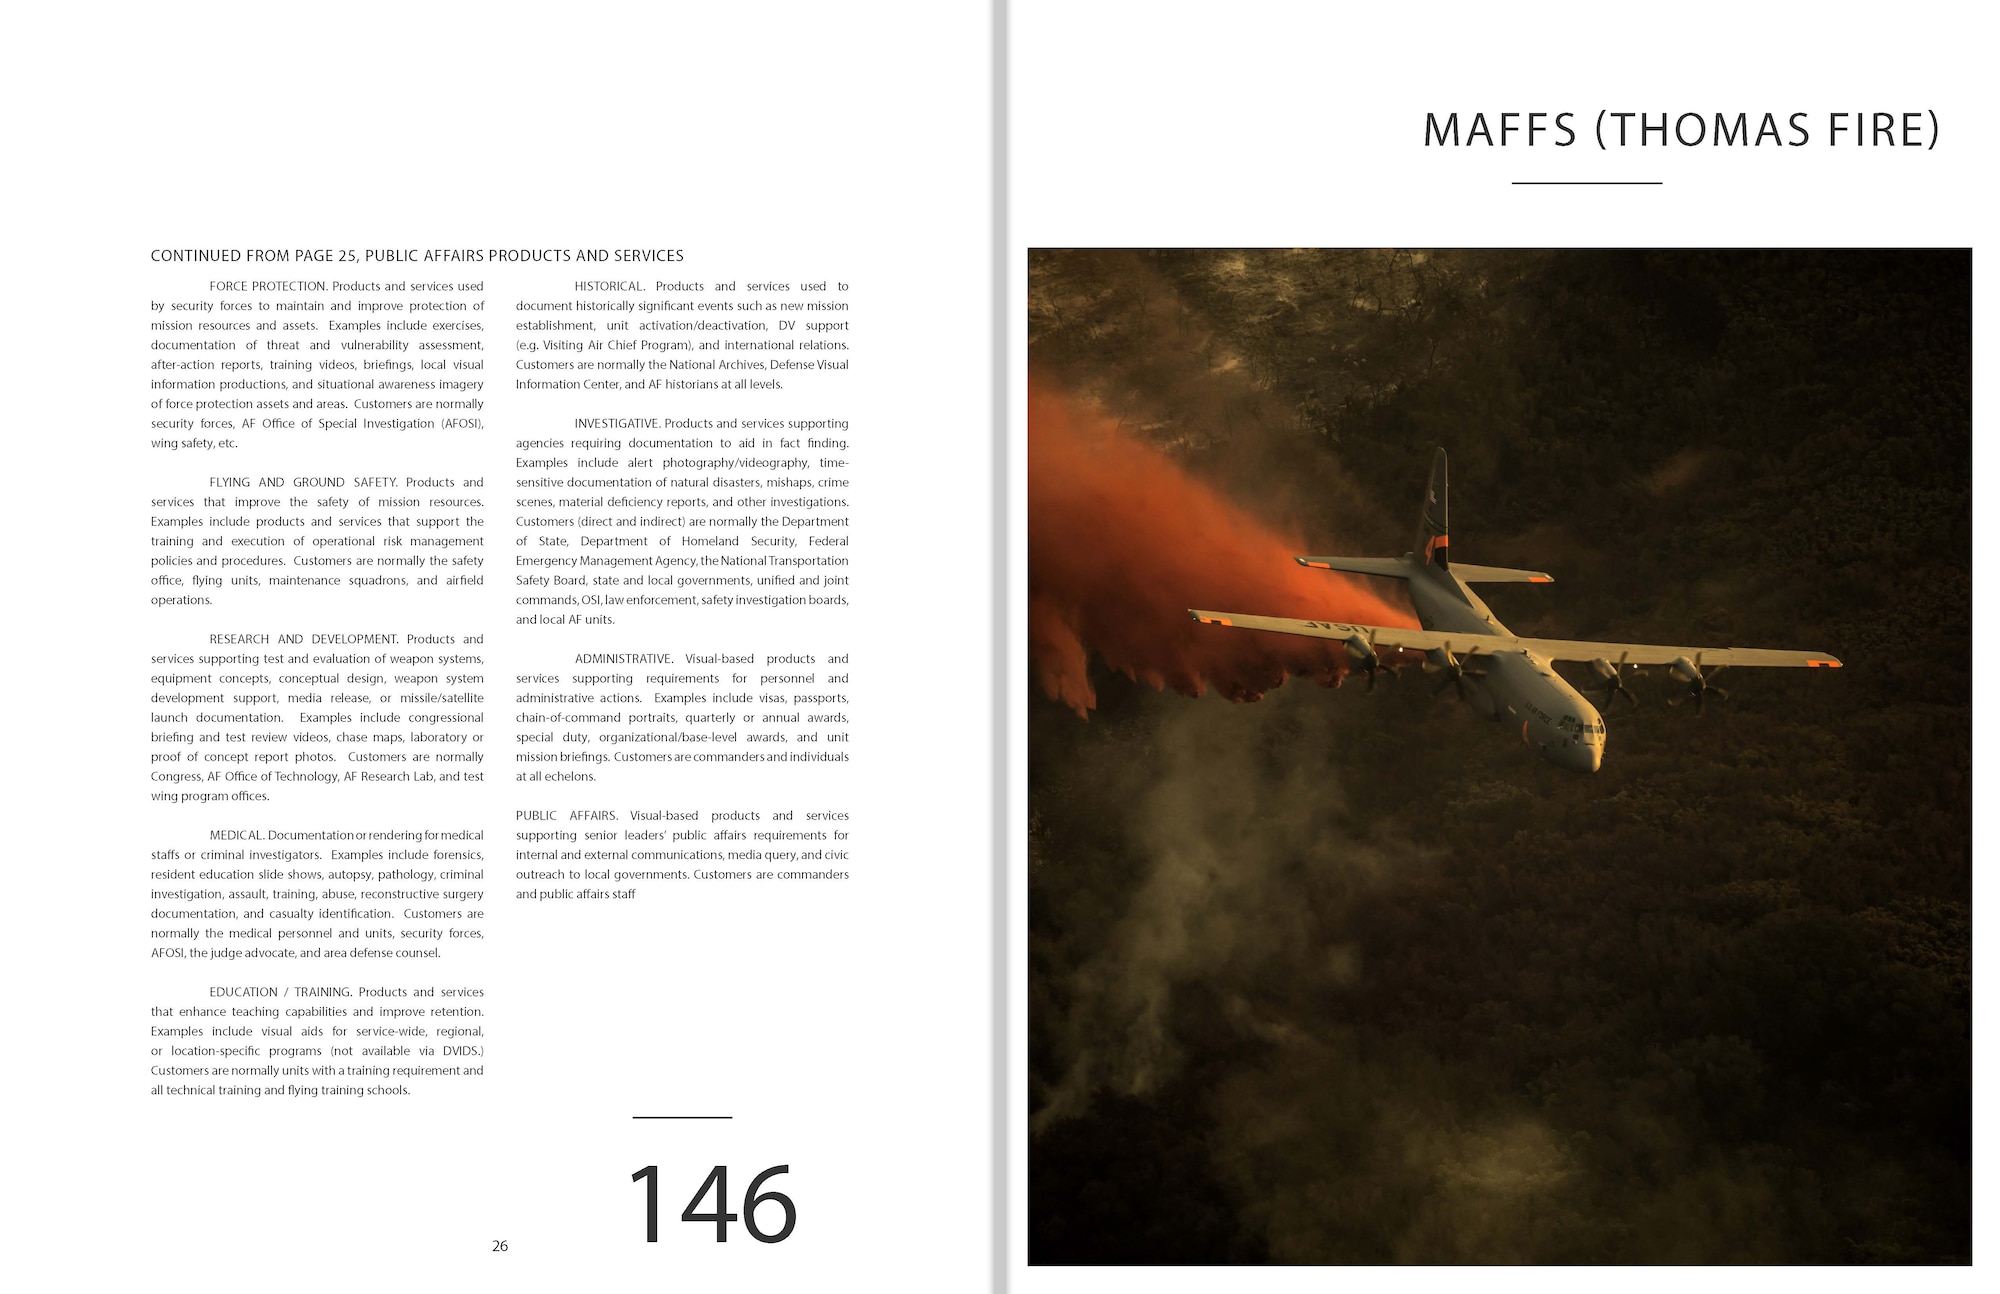 A magazine layout for the 146th Public Affairs Customer Service Guide